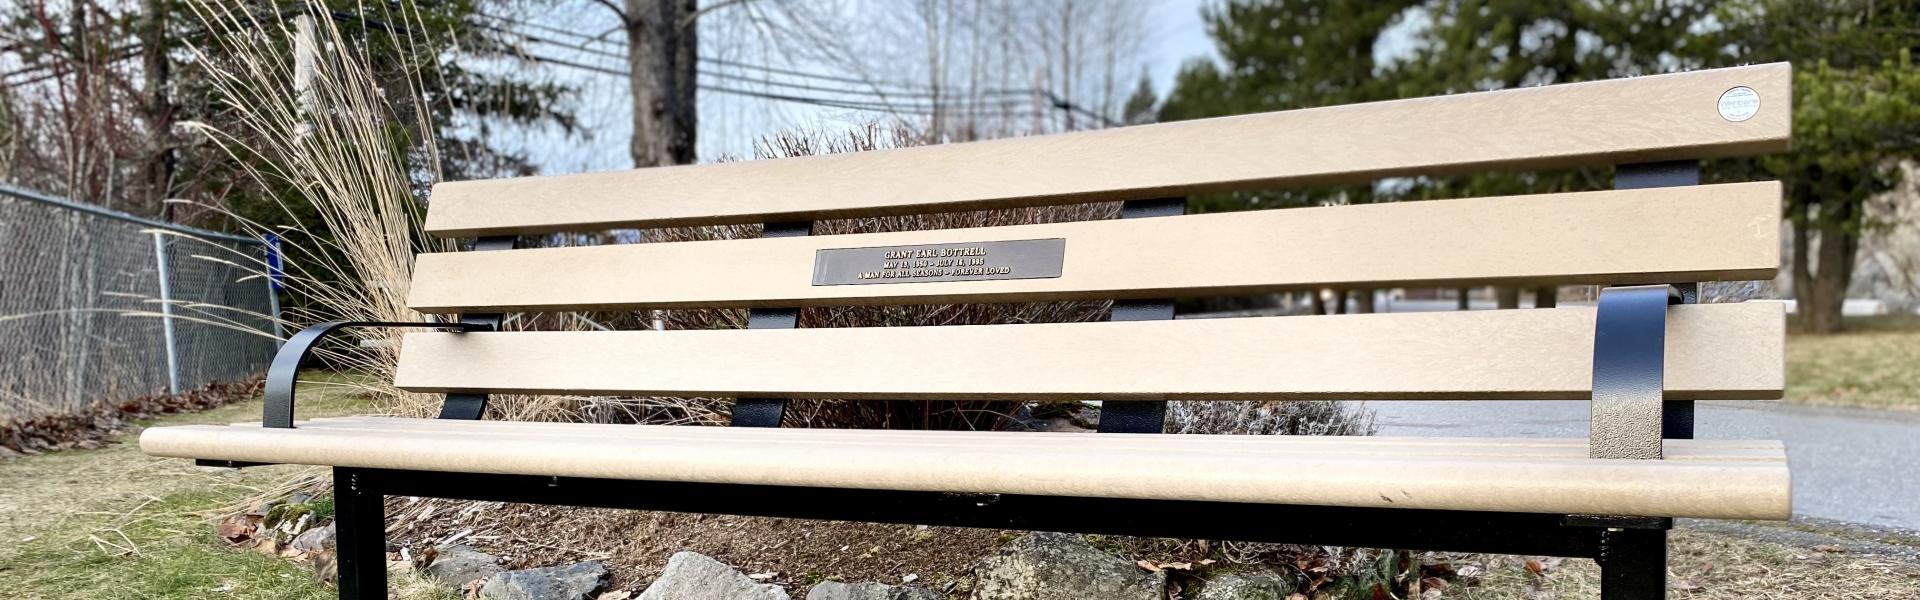 park bench with plaque installed on it